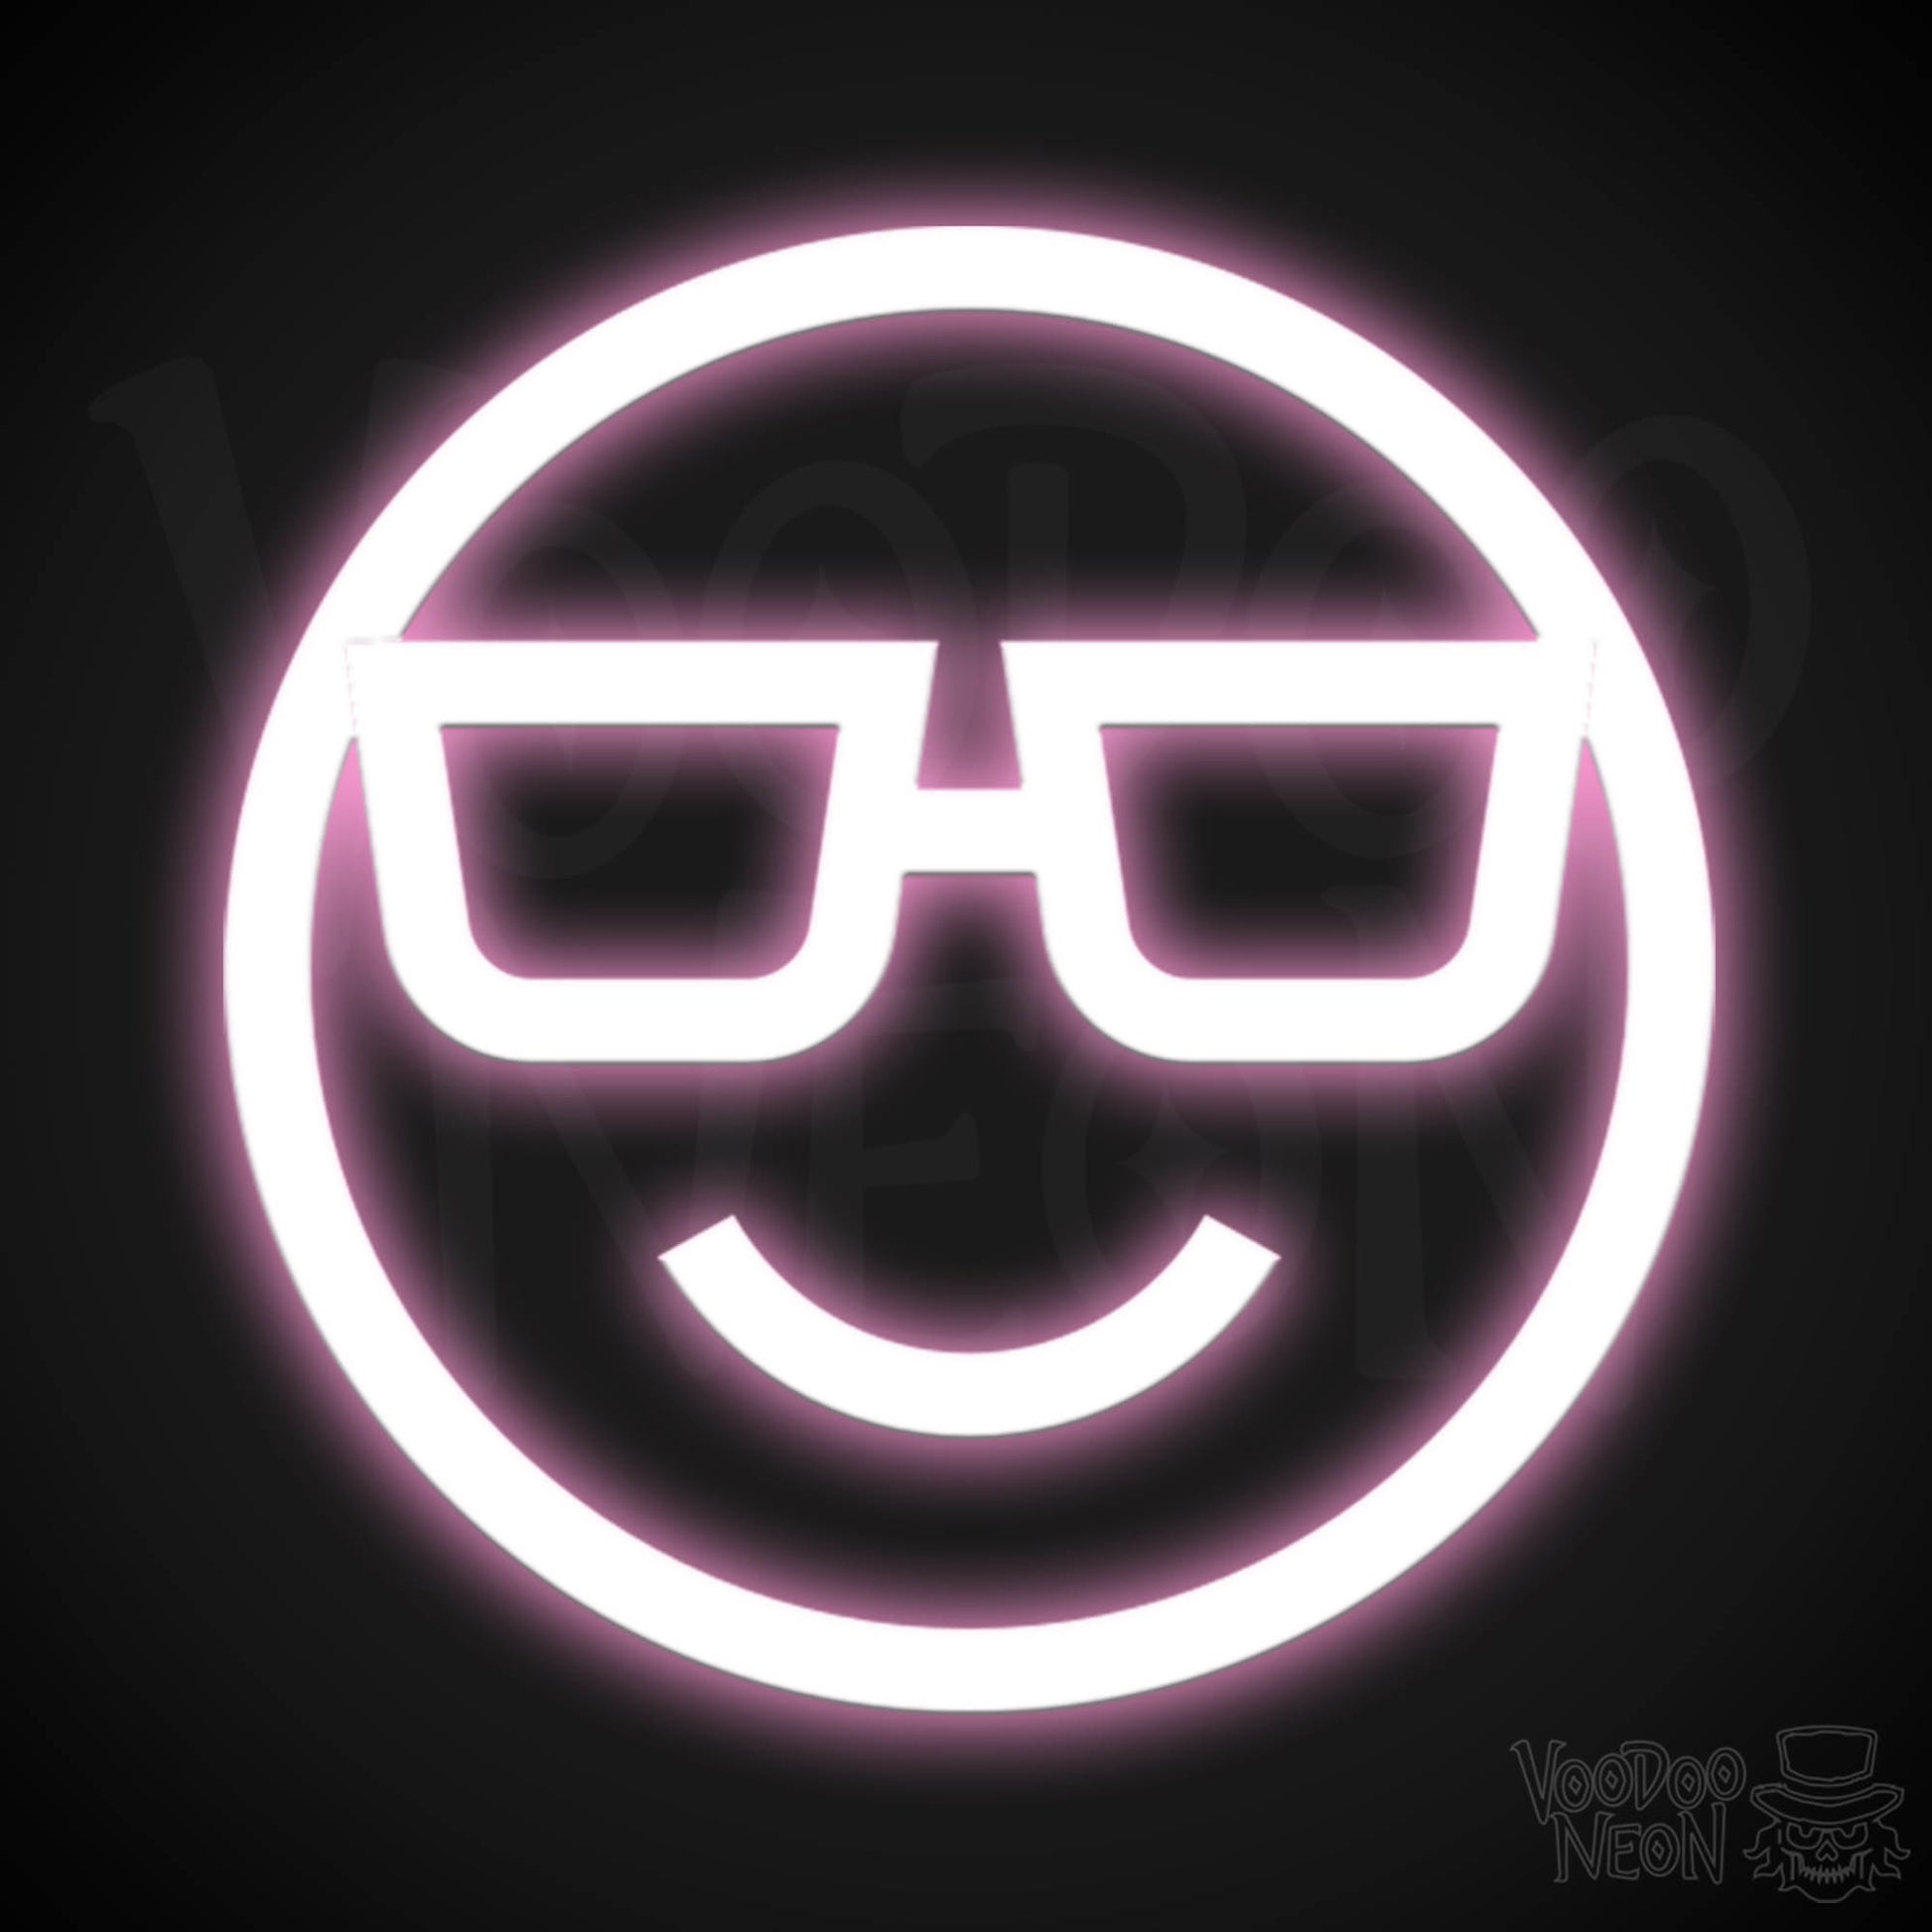 Neon Smiley Face - Smiley Face Neon Sign - LED Wall Art - Color Light Pink